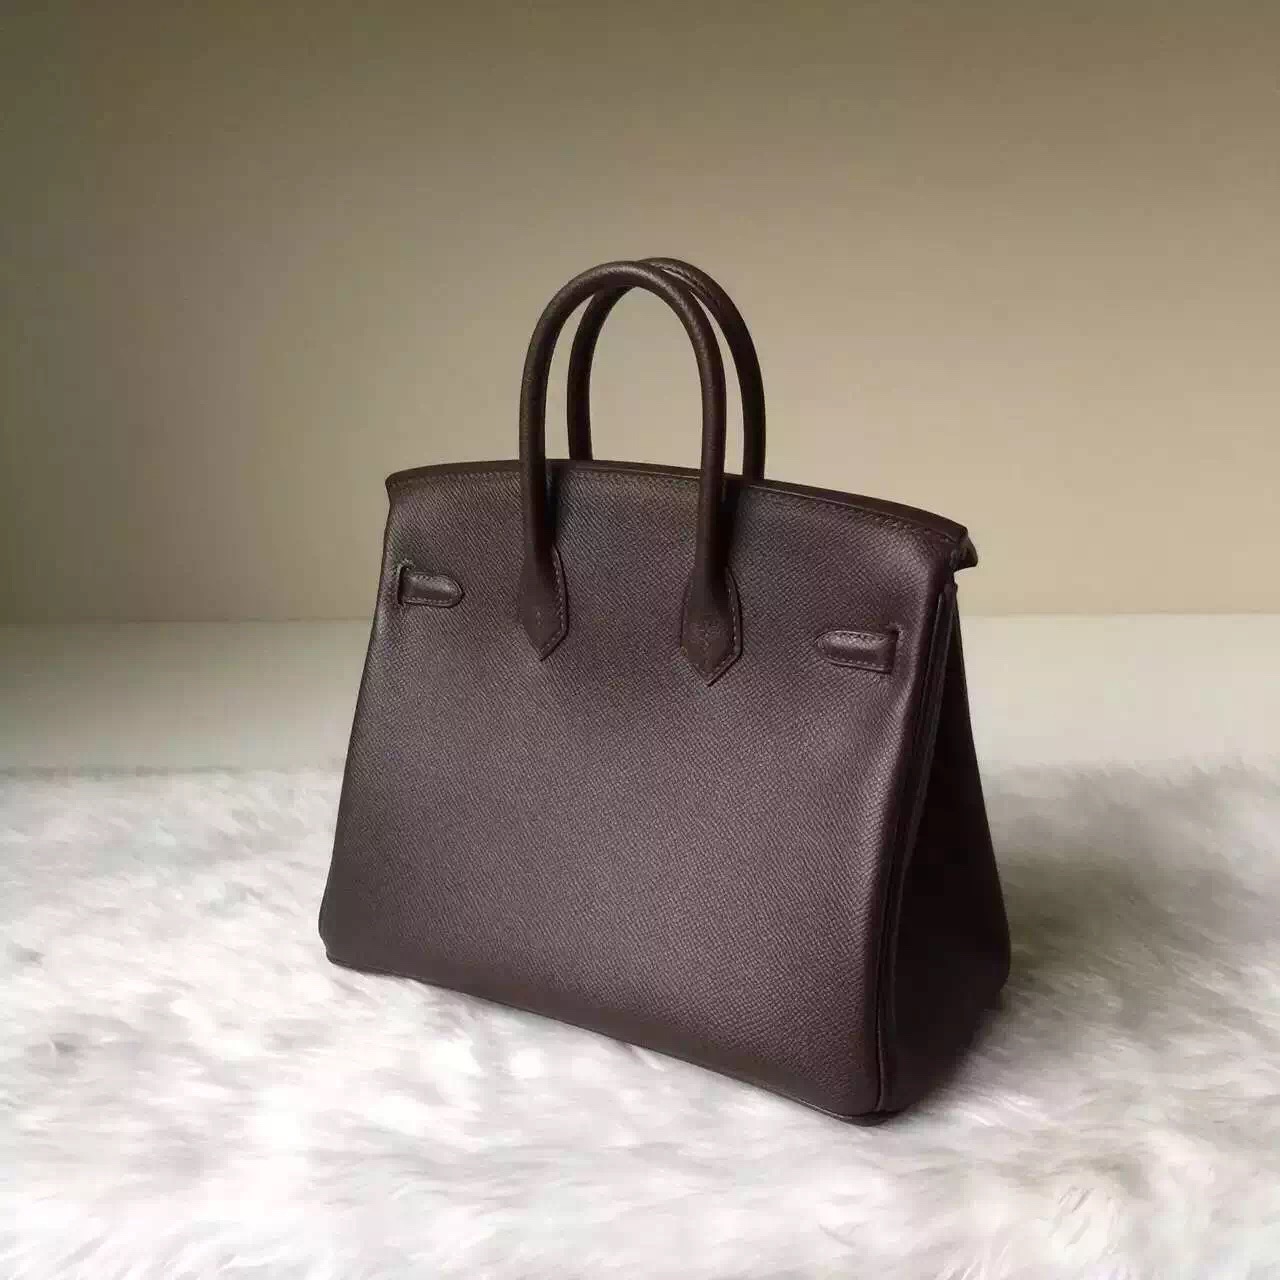 Hand Stitching Hermes Birkin25cm in Coffee Color Epsom Leather